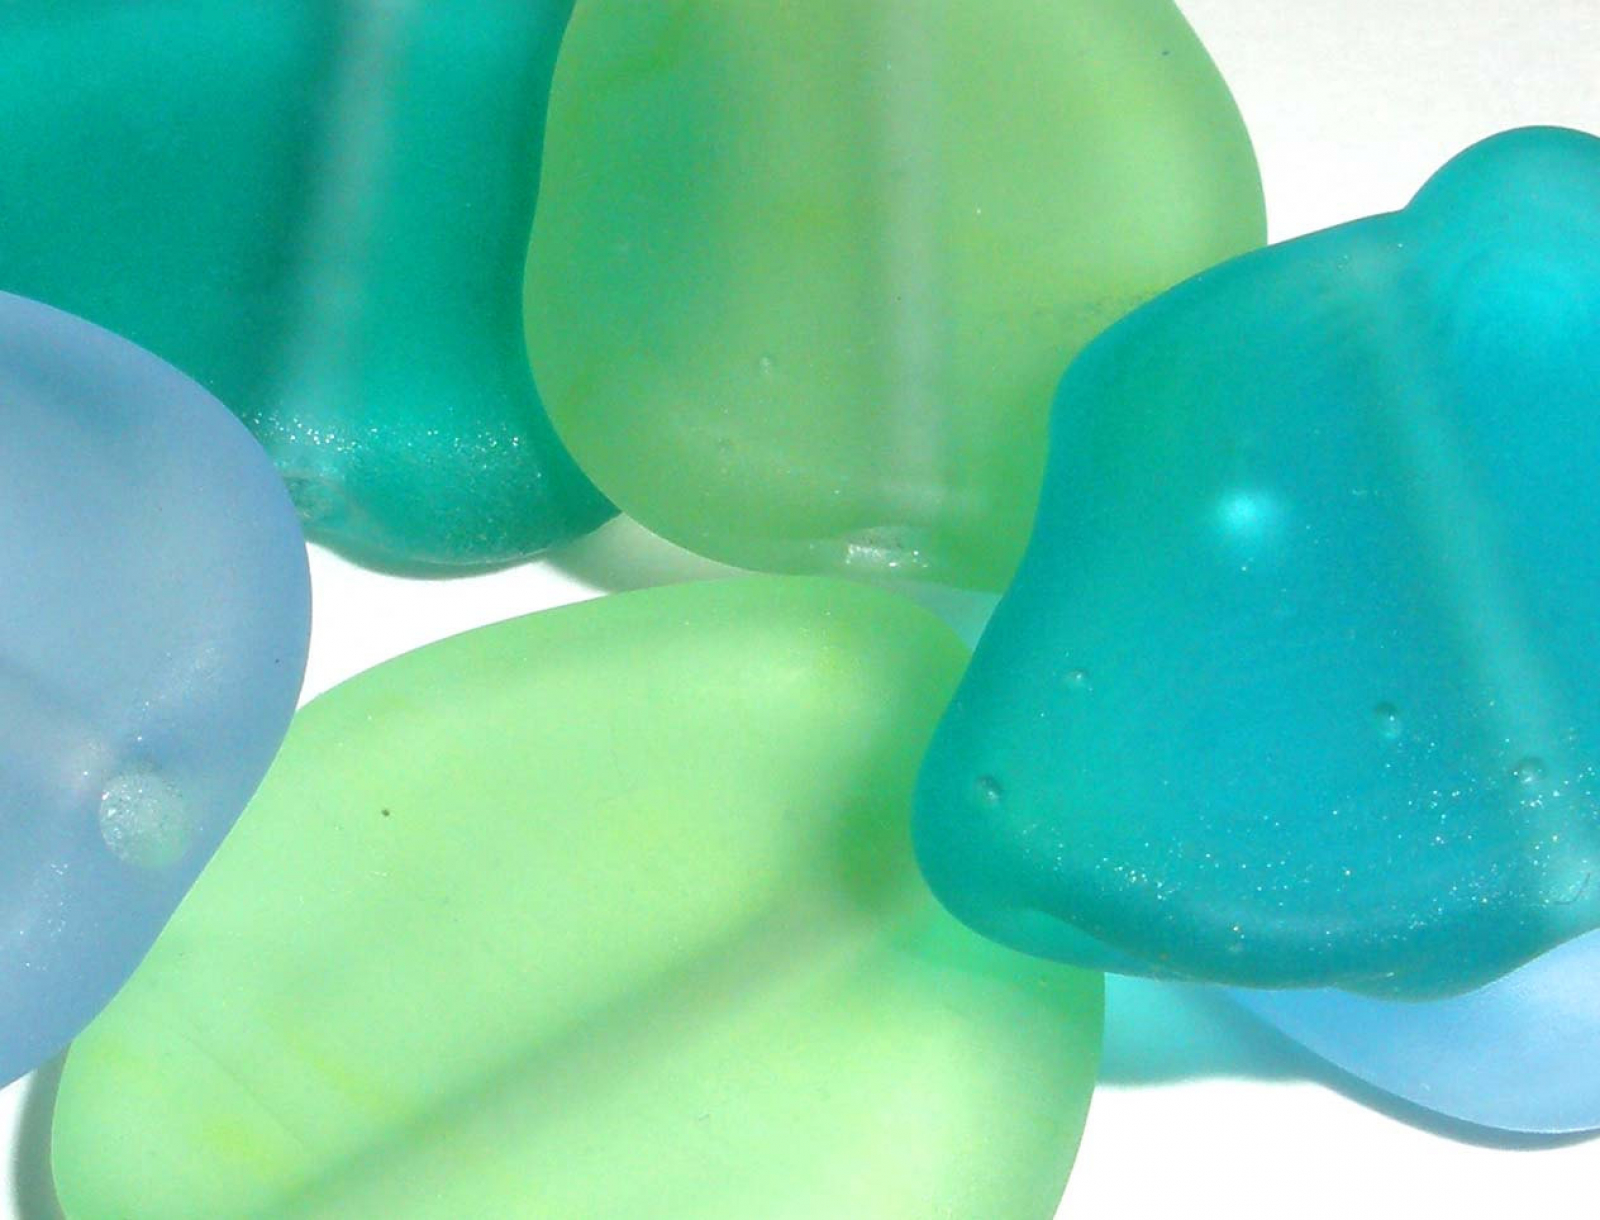 Sea Glass Beads/Beach Glass Beads for Jewelry Making (Medium Size / 10-14  mm, Multicolored Green Lime Teal Light-Green Mix, Not Drilled) (20 Pieces)